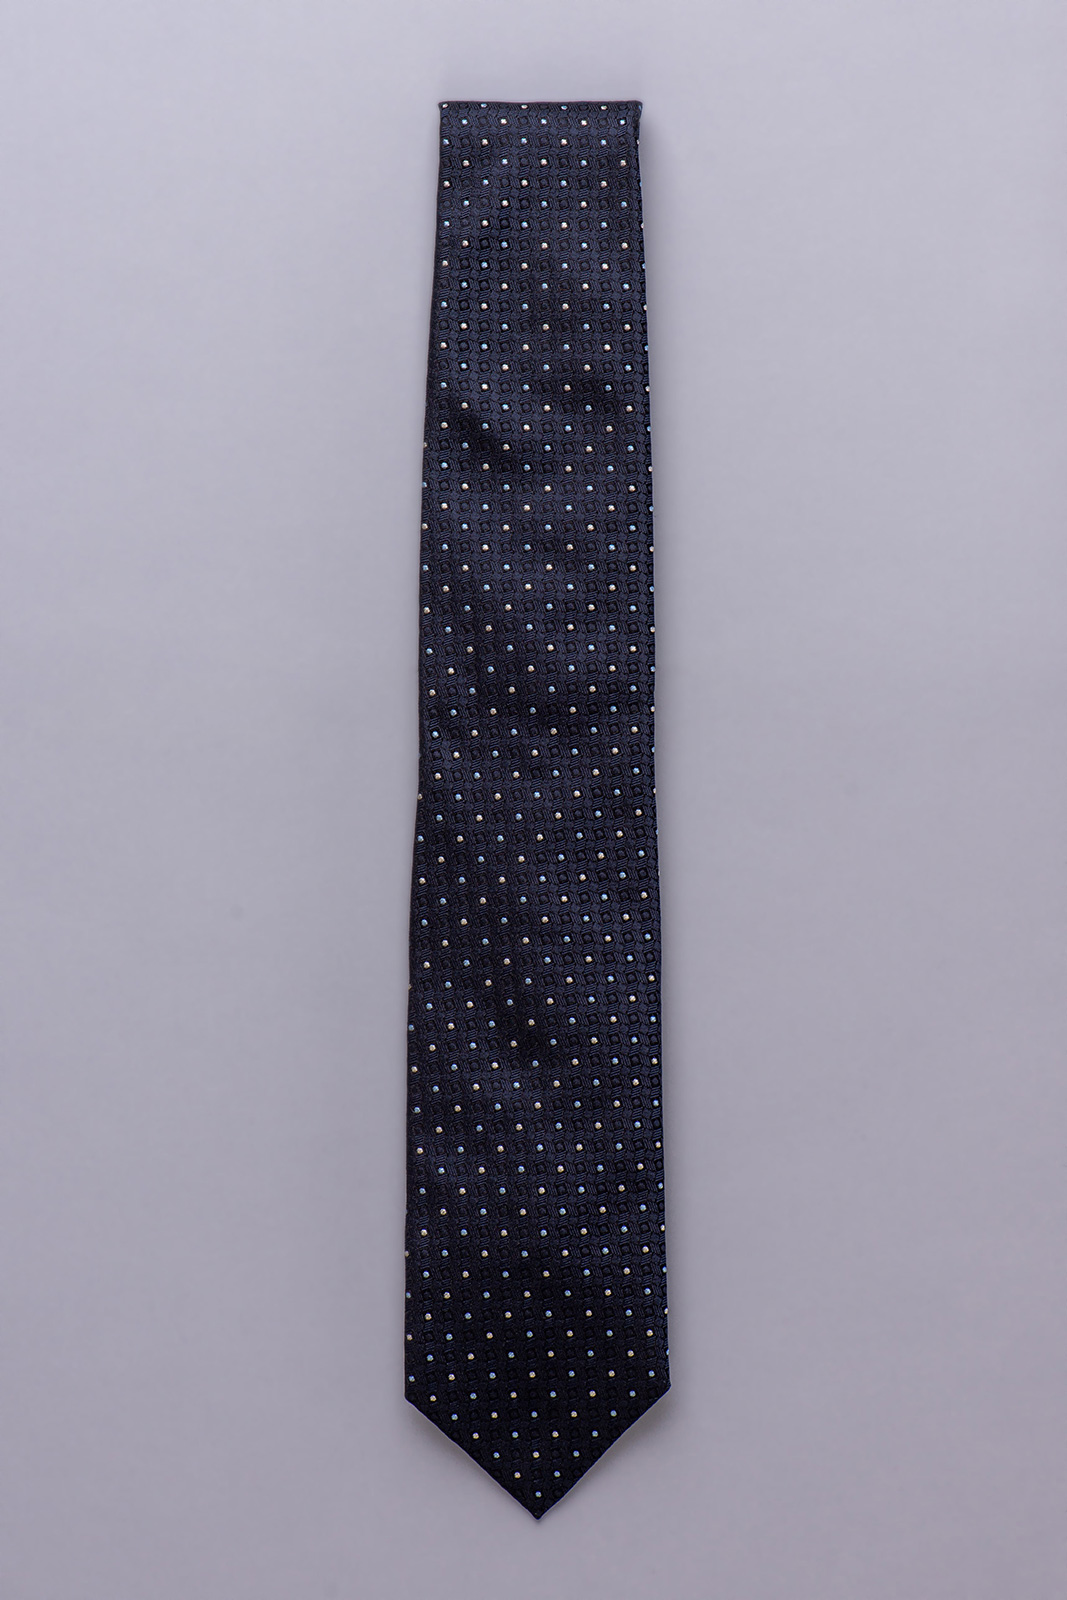 Dark Blue Tie With Light Blue and White Dots 